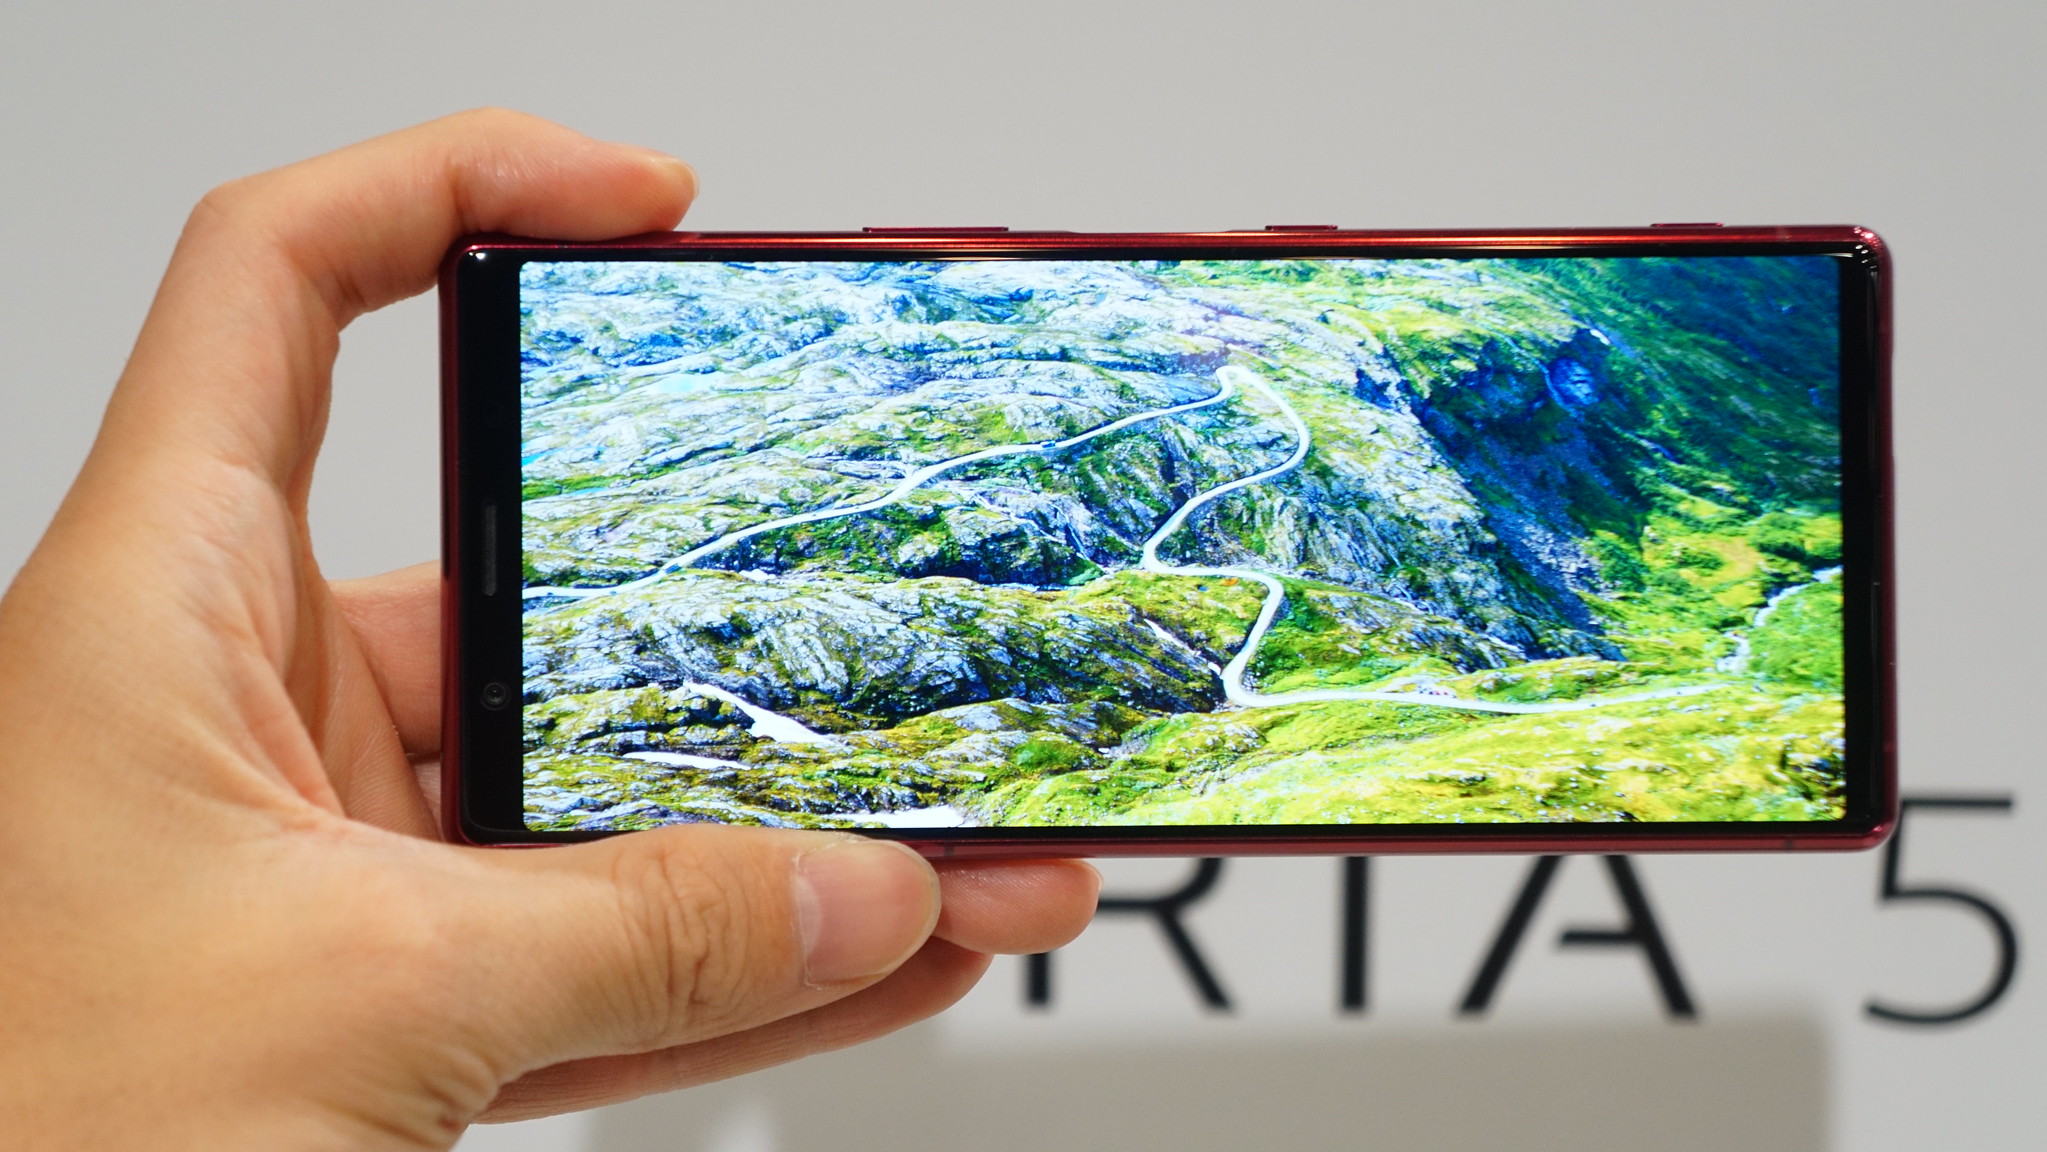 xperia-5-photo-review-display